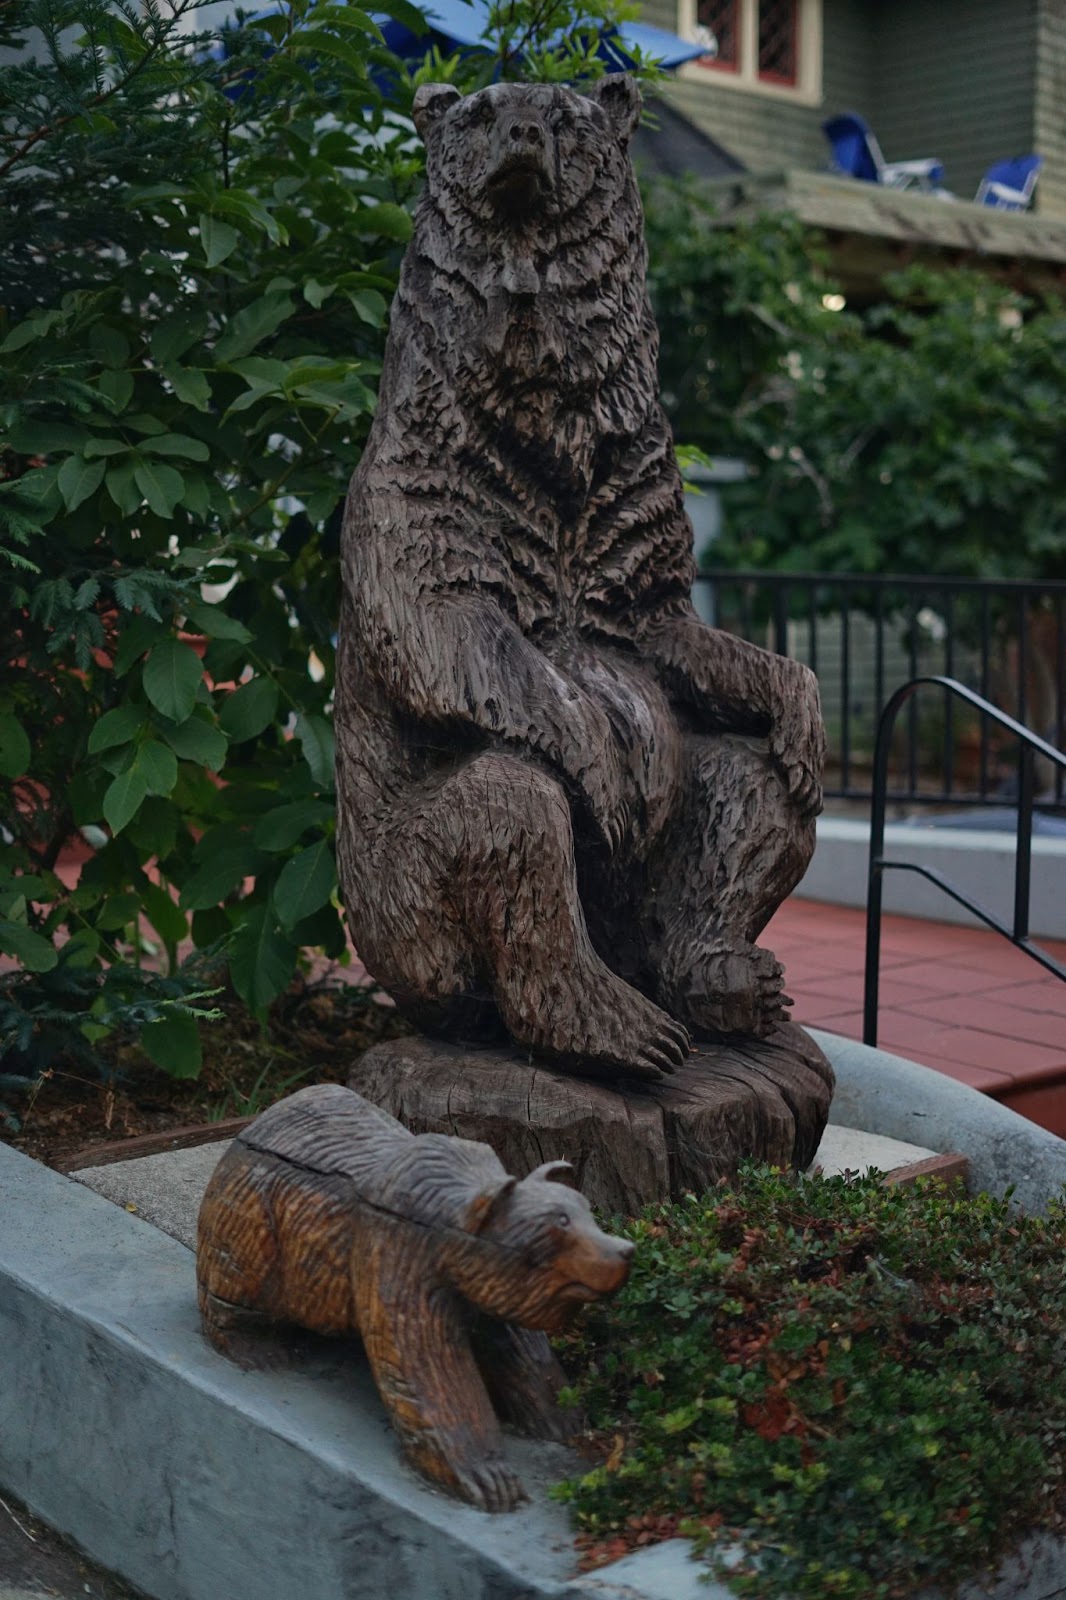 A wood carved statue of a bear sitting upright, with a small bear cub carving walking next to it. 